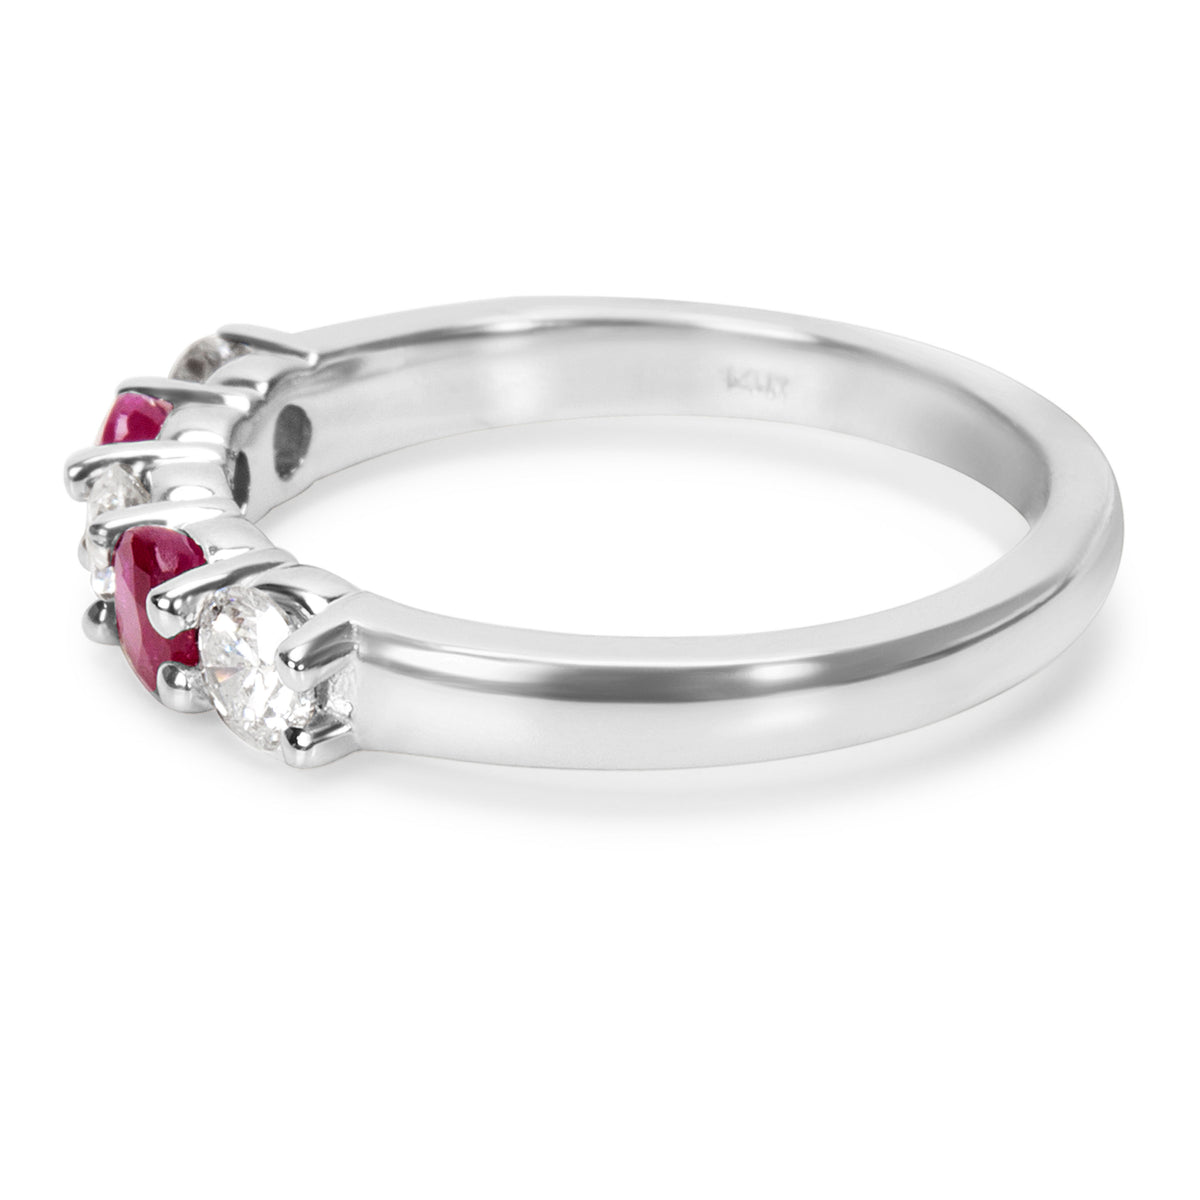 BRAND NEW Diamond & Ruby 5-Stone Band in 14K White Gold (0.62 CTW)